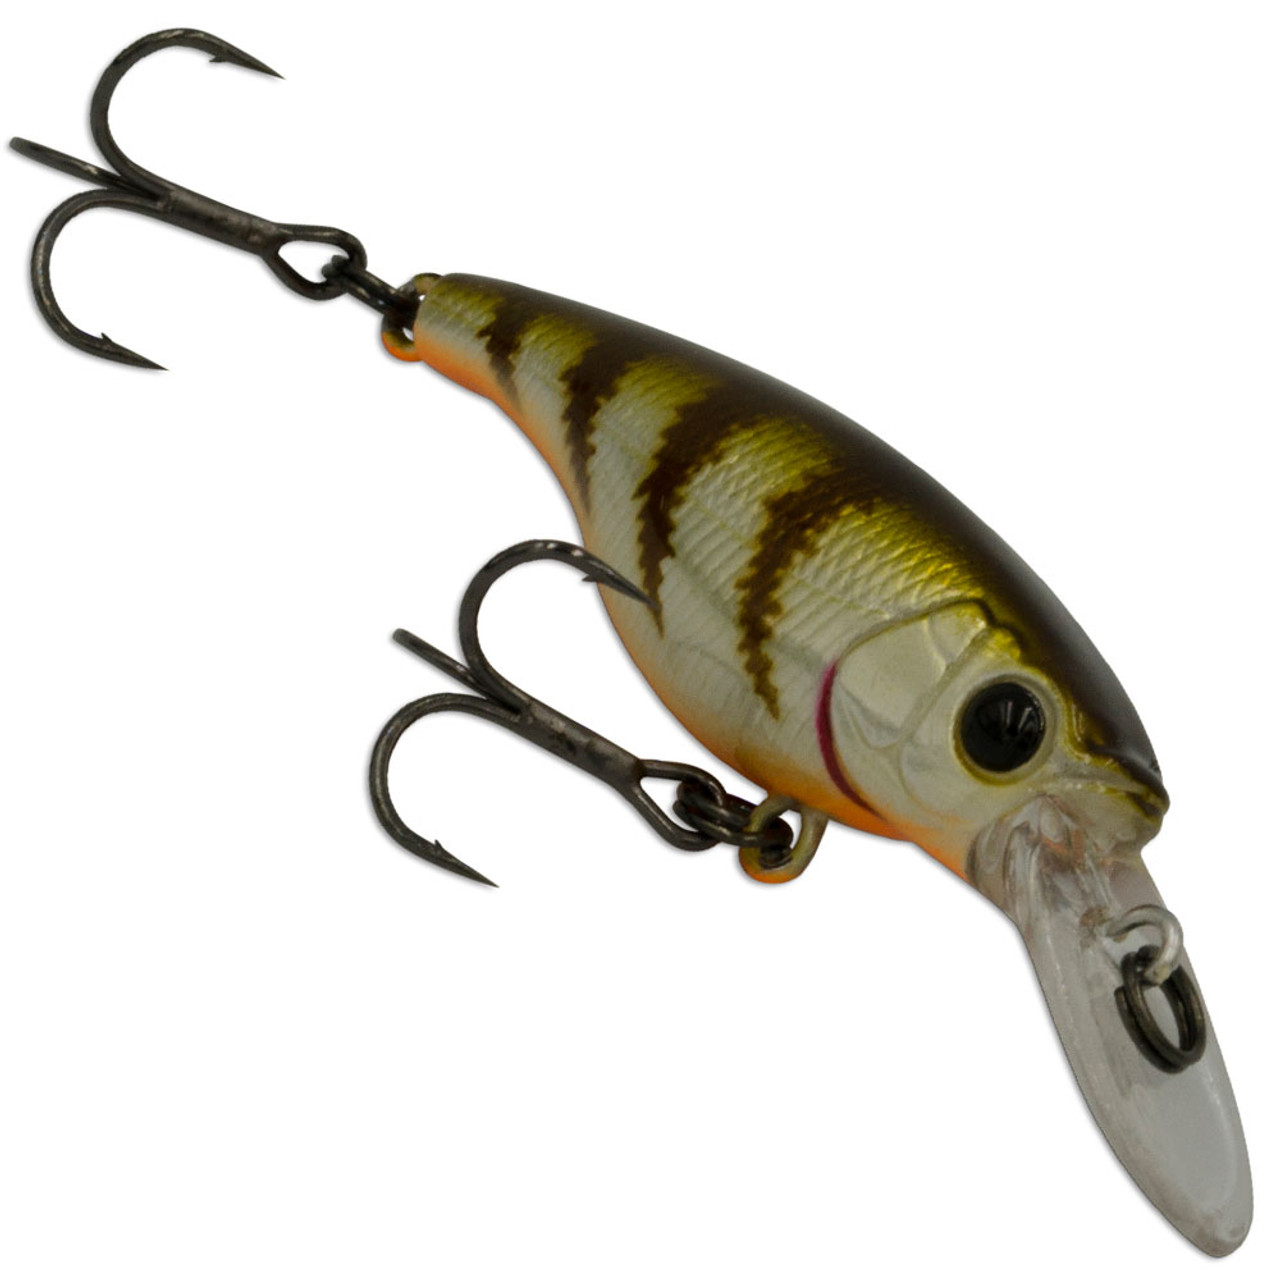 Ecogear SX40 Fishing Lures Bream Lure